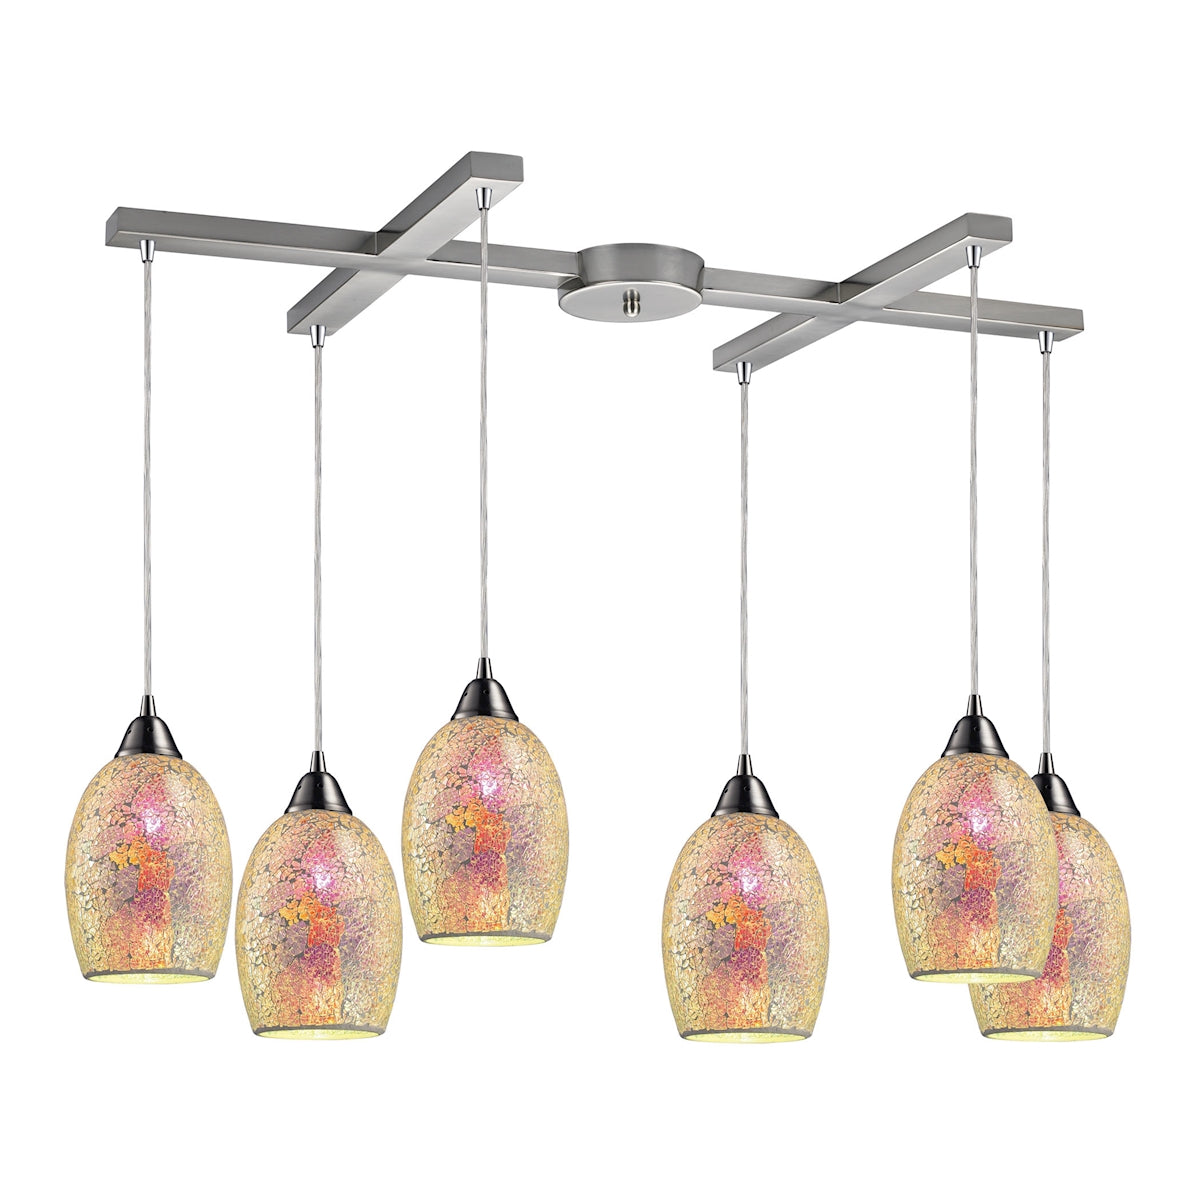 ELK Lighting 73041-6 Avalon 6-Light H-Bar Pendant Fixture in Satin Nickel with Multi-colored Crackle Glass